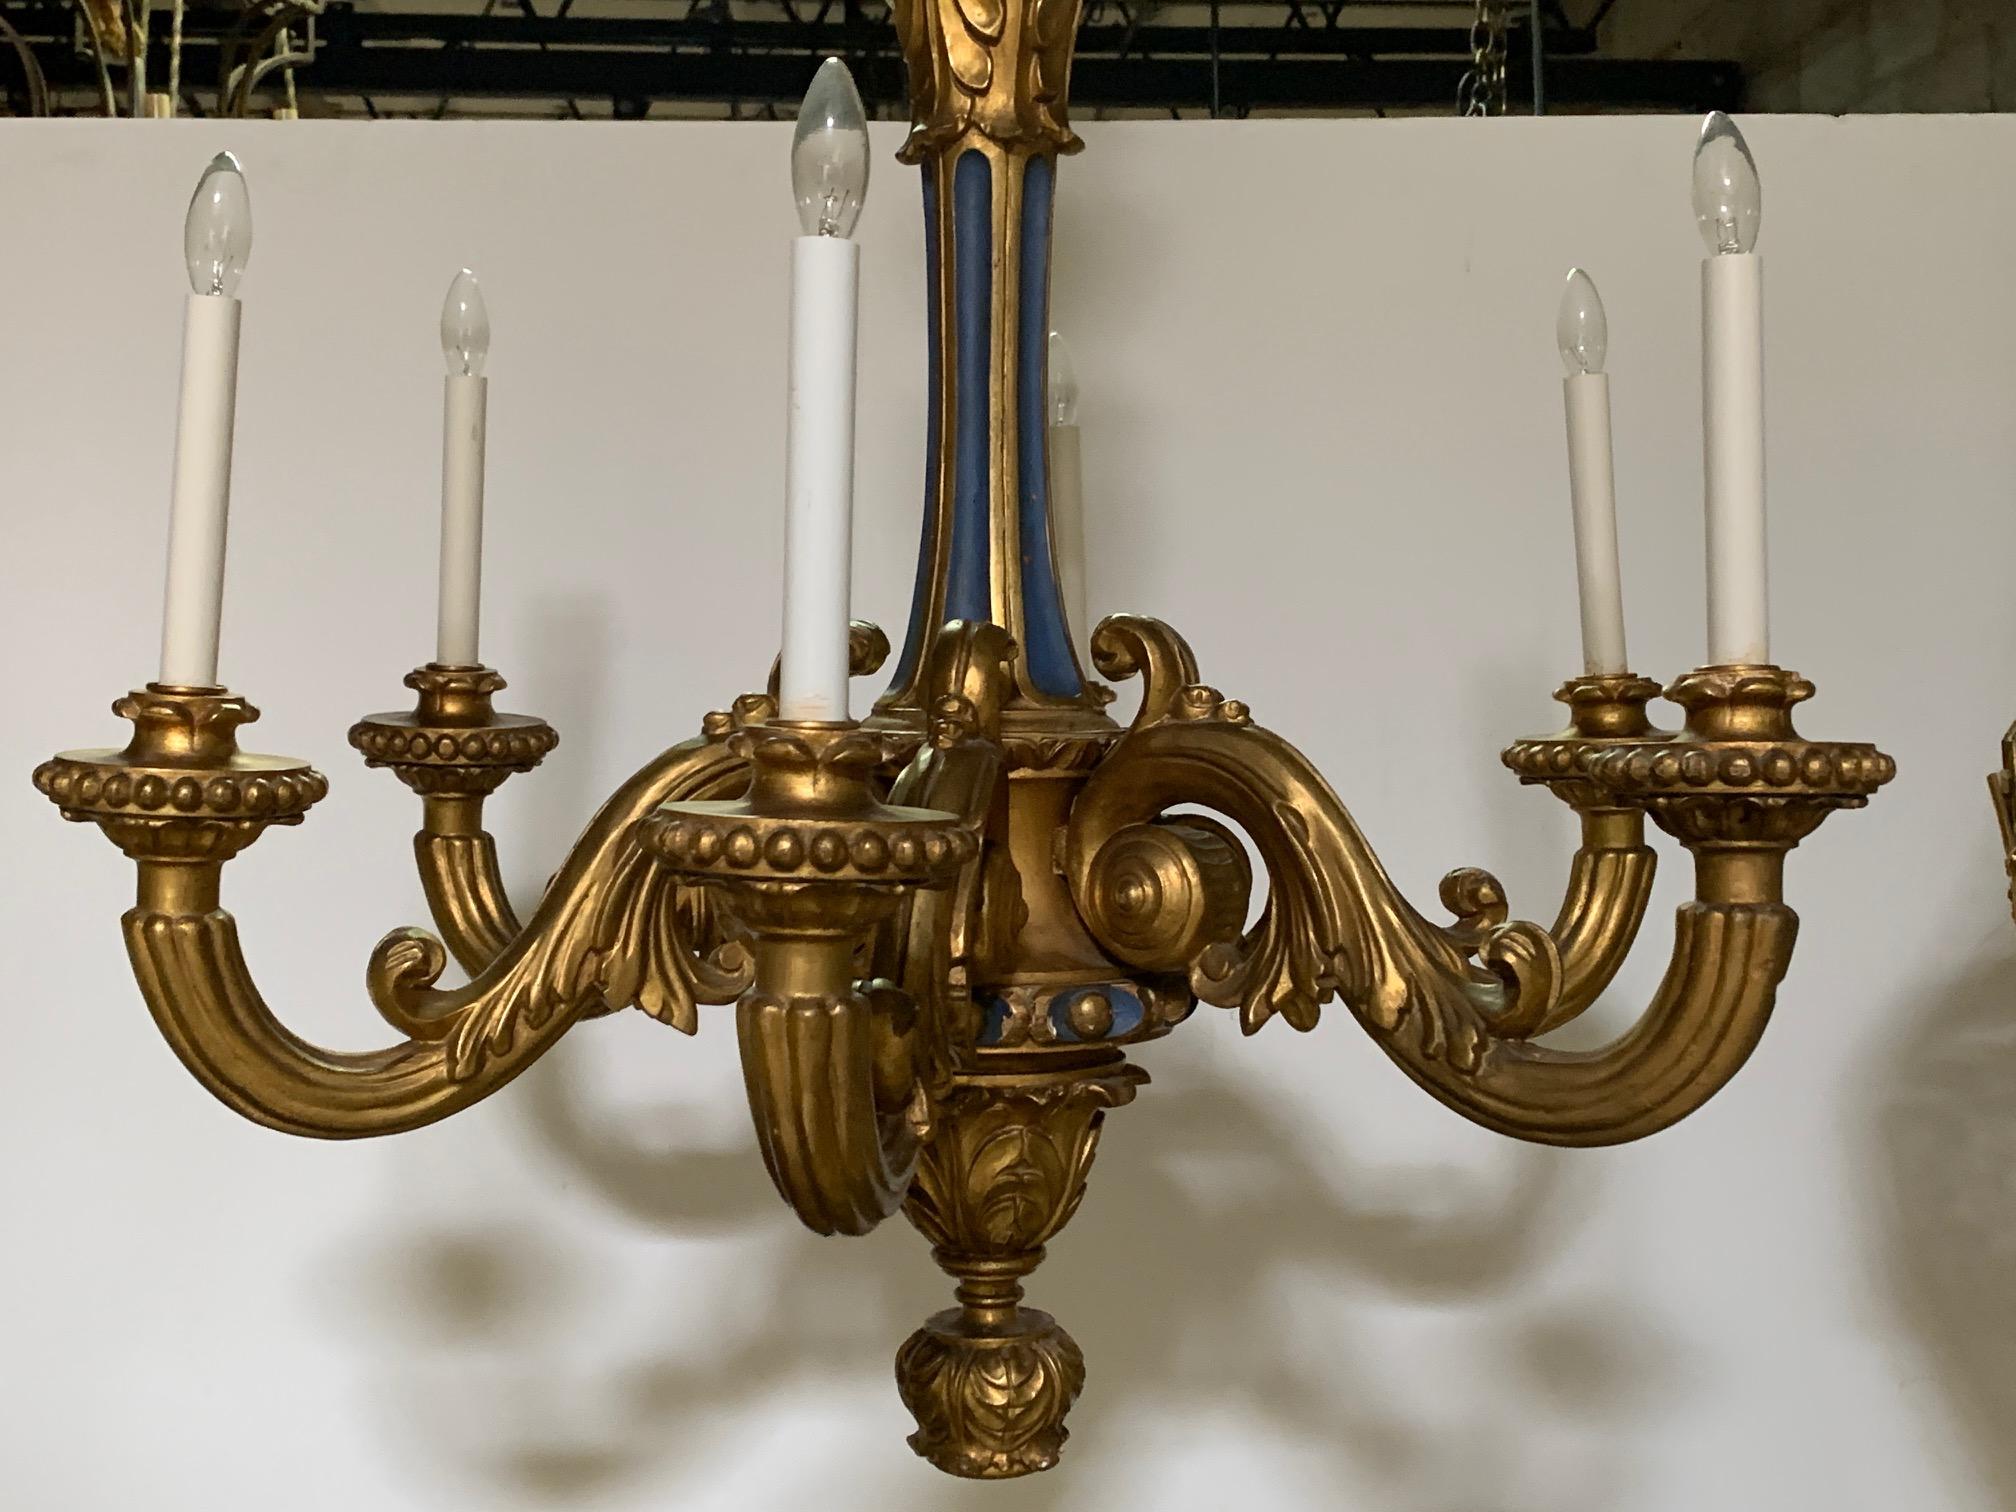 French Louis XVI style carved wood six-light chandelier with a gold leaf and blue painted finish. The chandelier dates from the early 20th century and appears to have been gilded and painted at a later date. The finish is beautiful with a wonderful